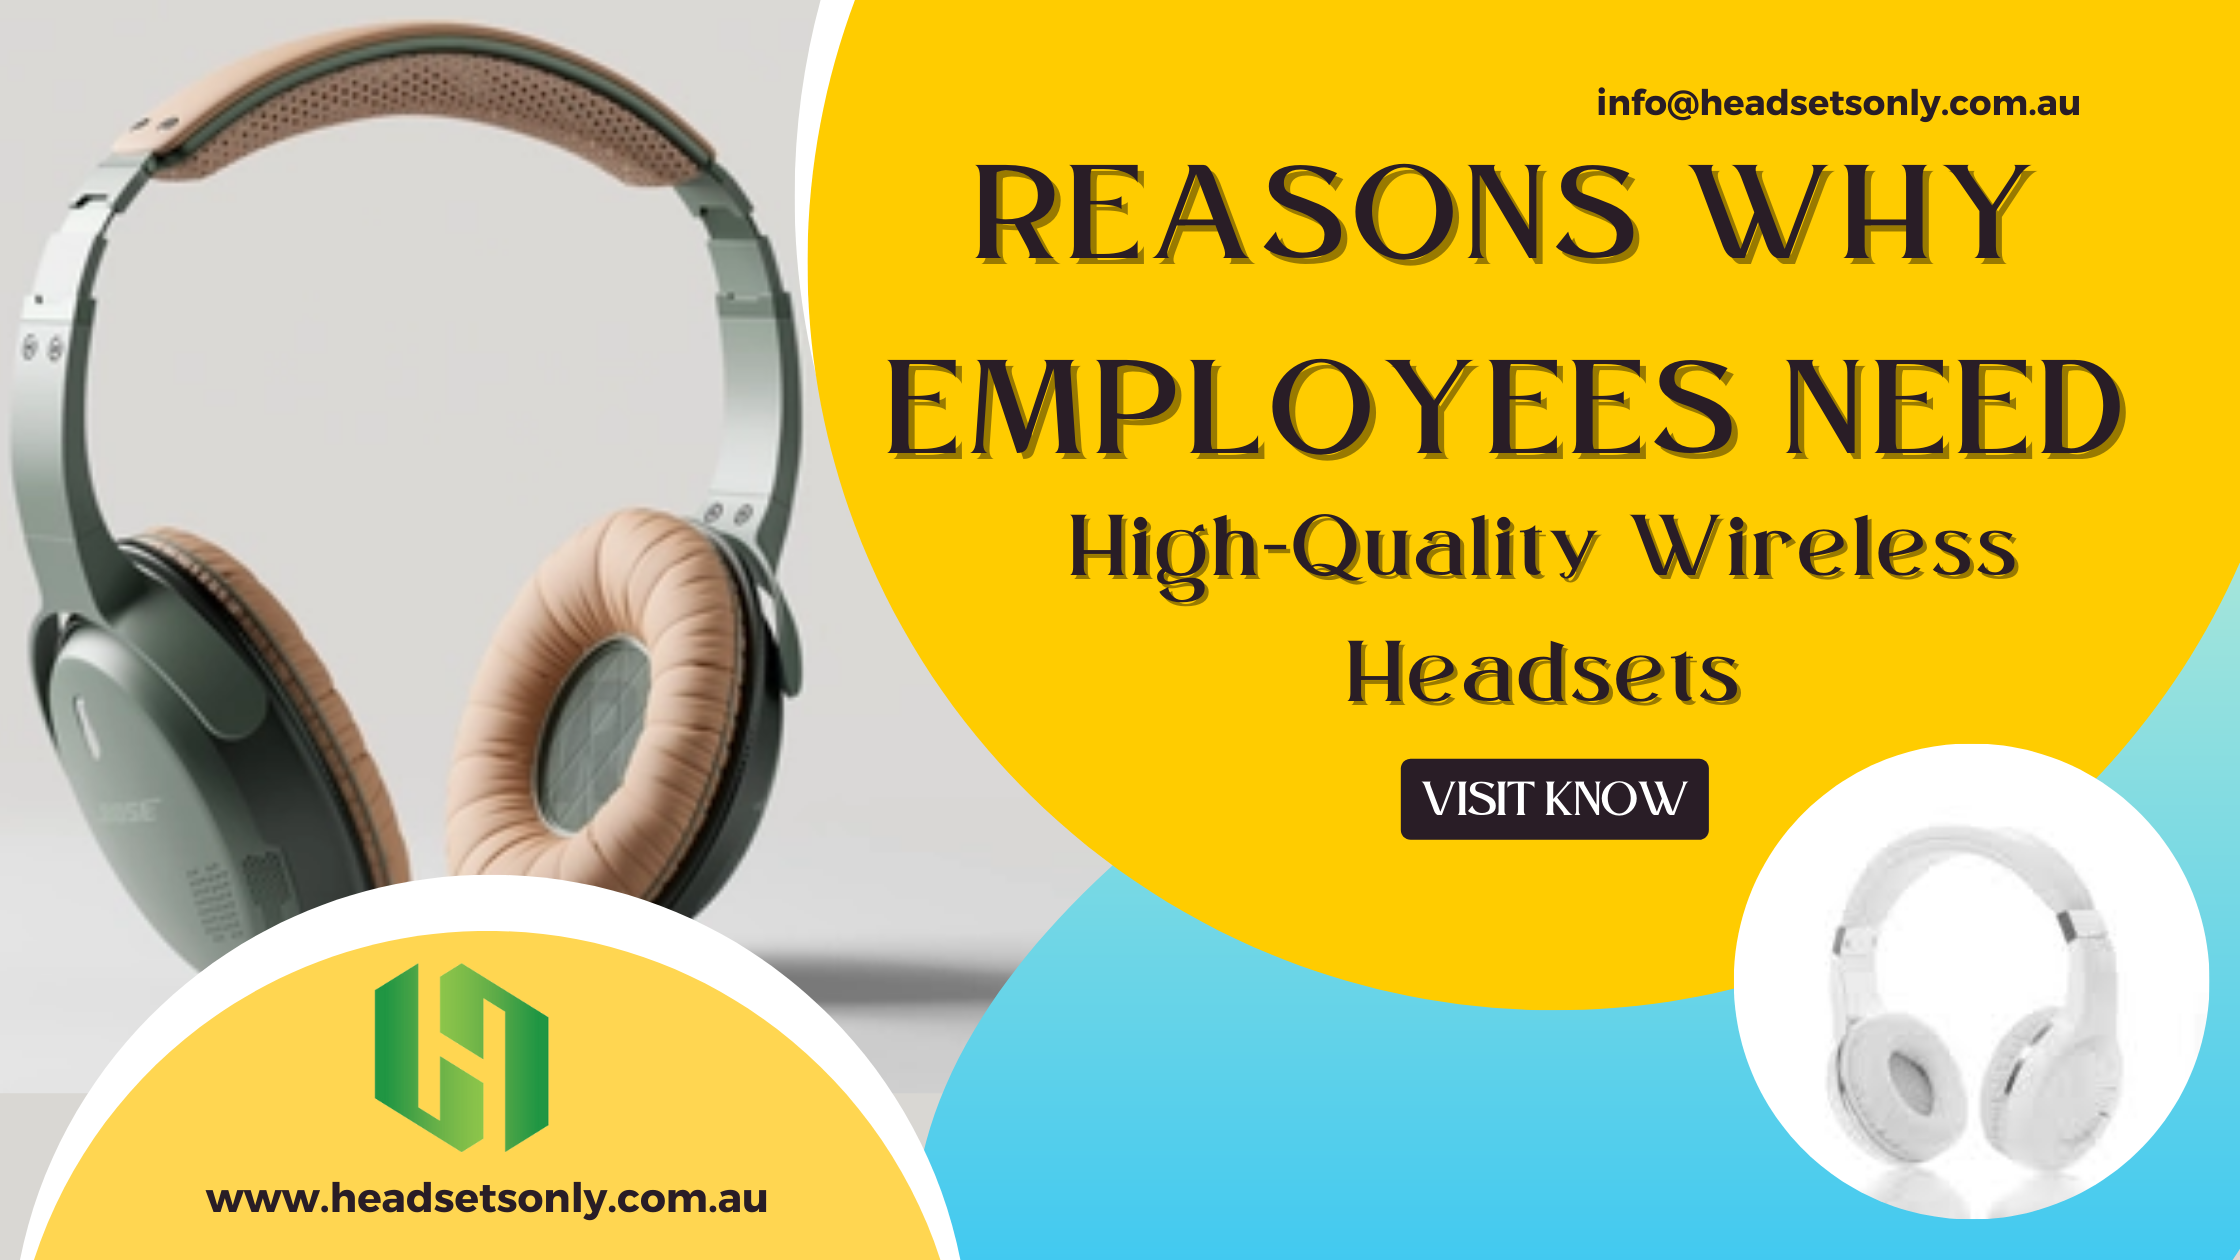 Reasons Why Employees Need High-Quality Wireless Headsets